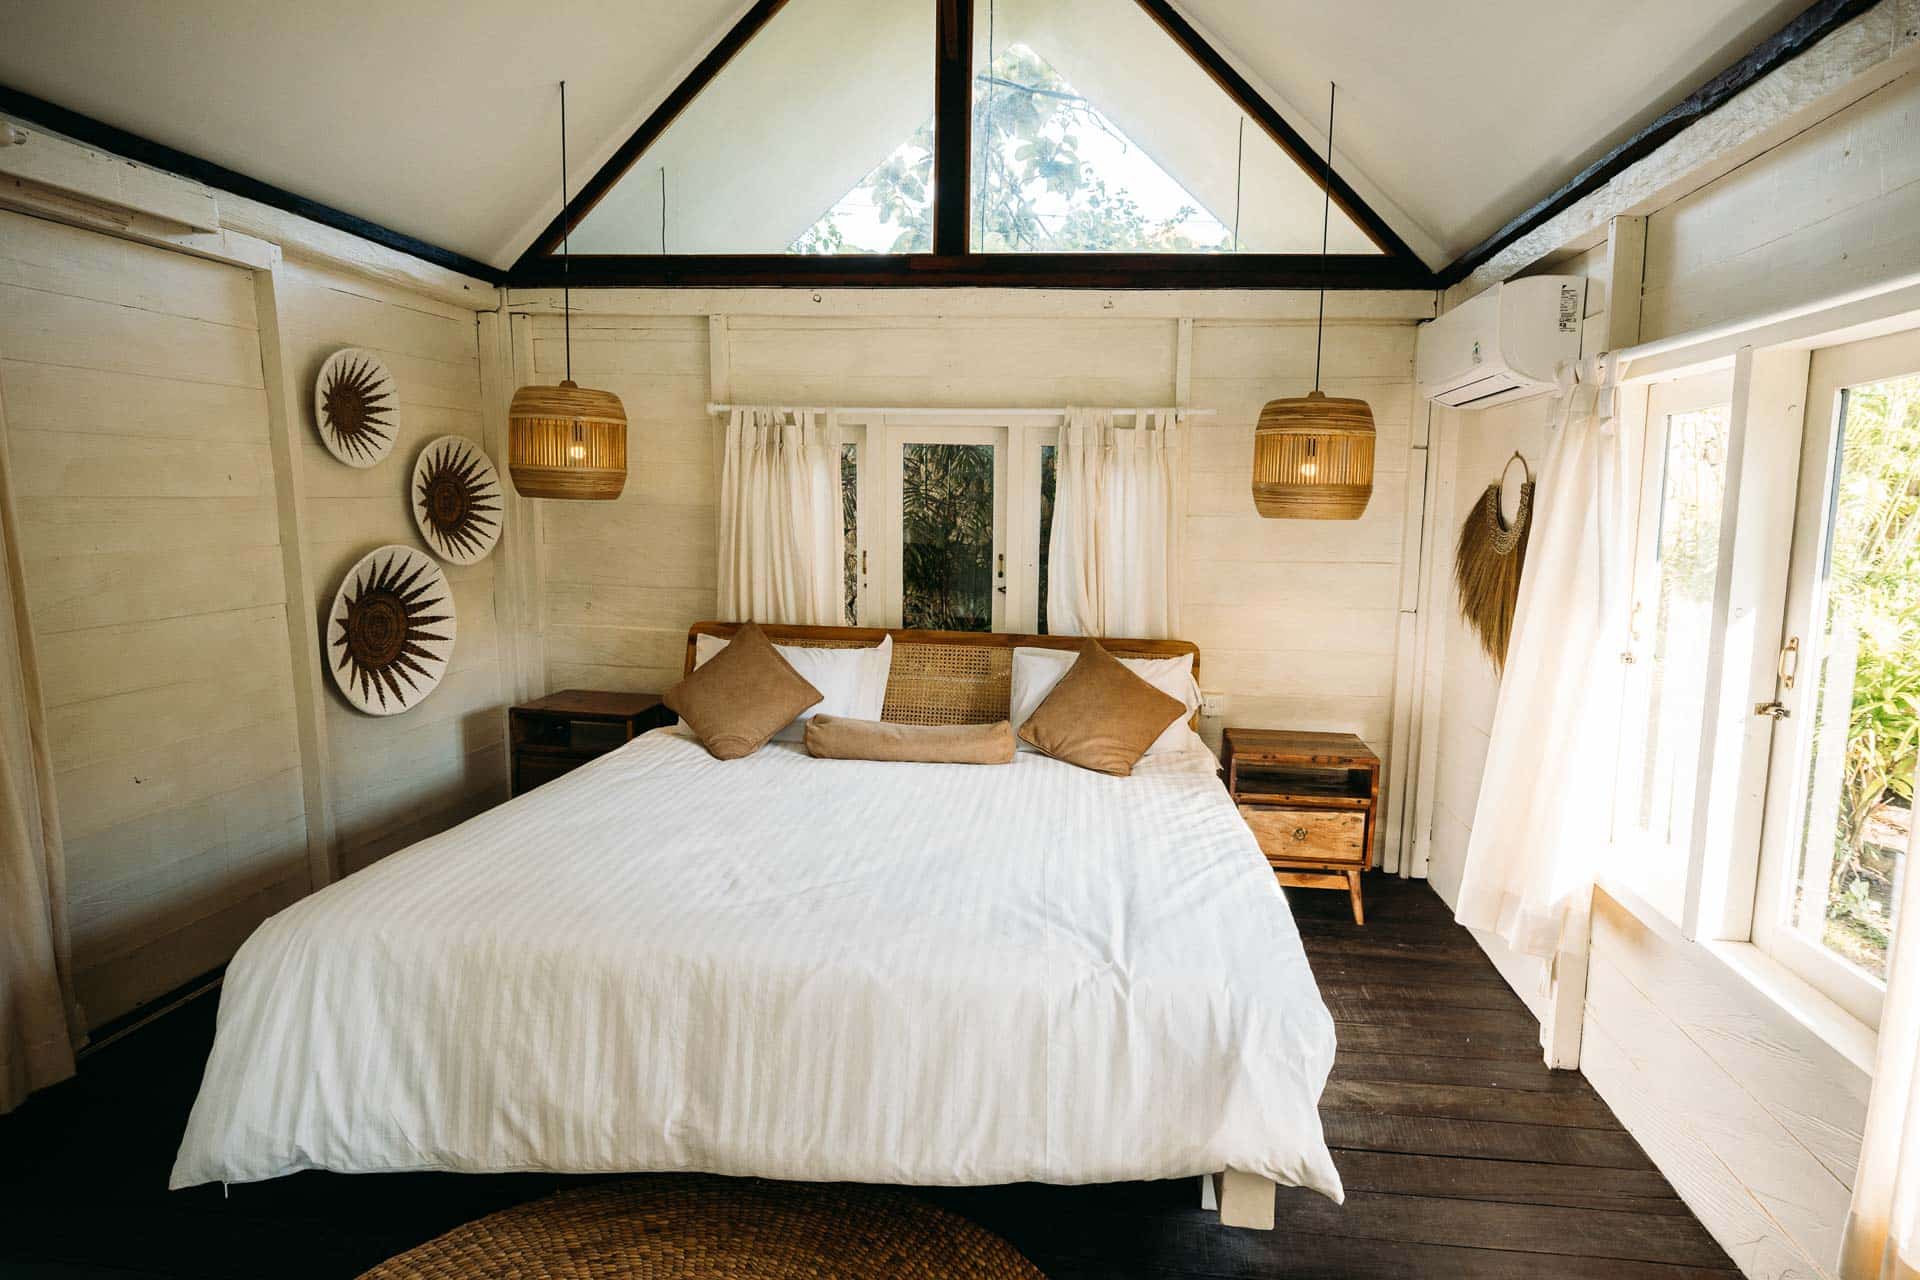 A rustic surfcamp bedroom decorated in earth tones and white